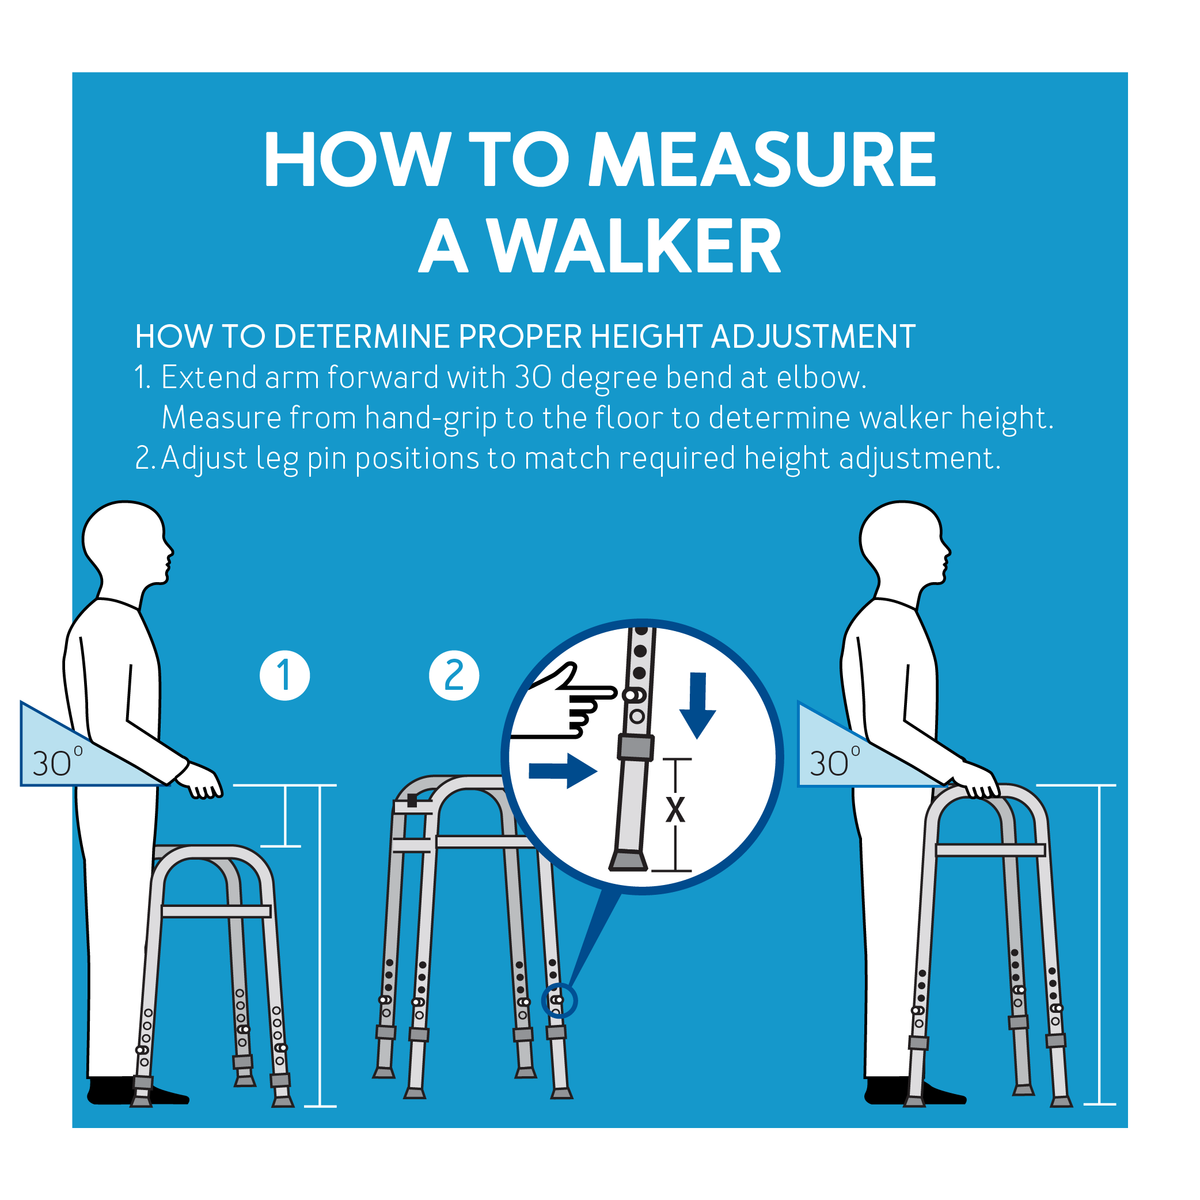 How to Measure for a walker, further details are provided below.